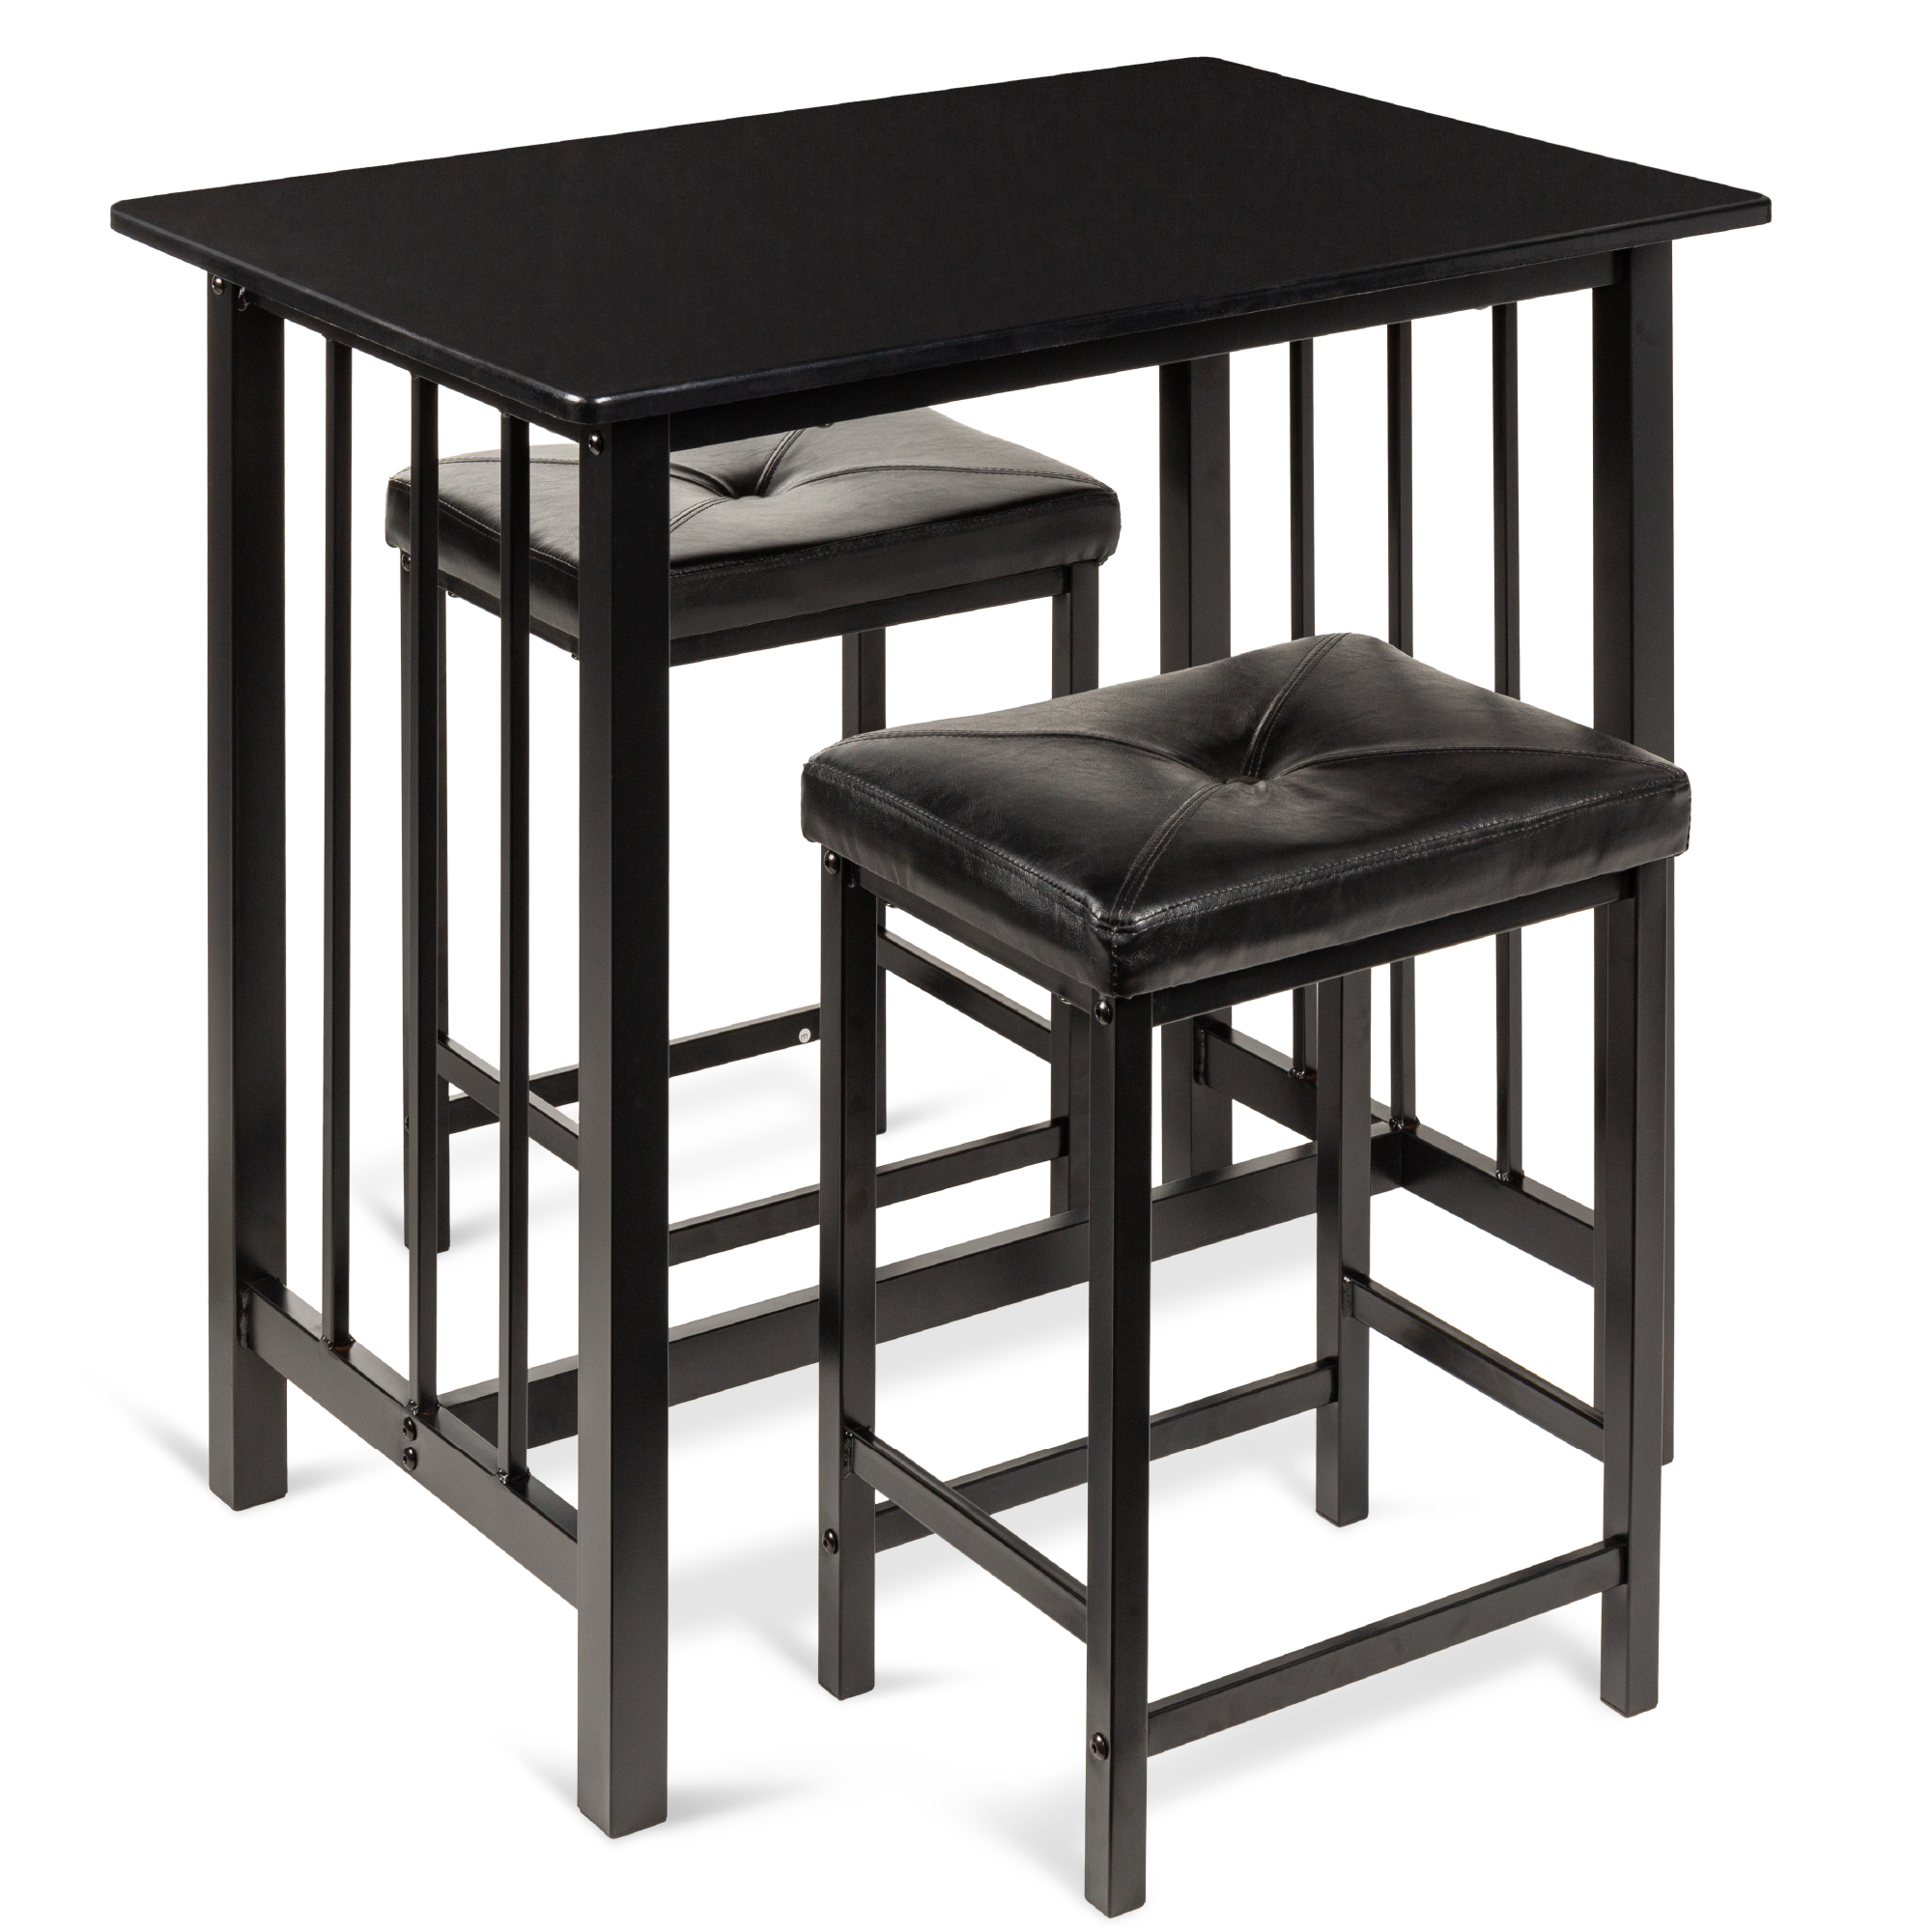 Best Choice Products 3-Piece Counter Height Dining Table Set w/ 2 Faux Leather Stools, Space-Saving Design - Black - image 1 of 7